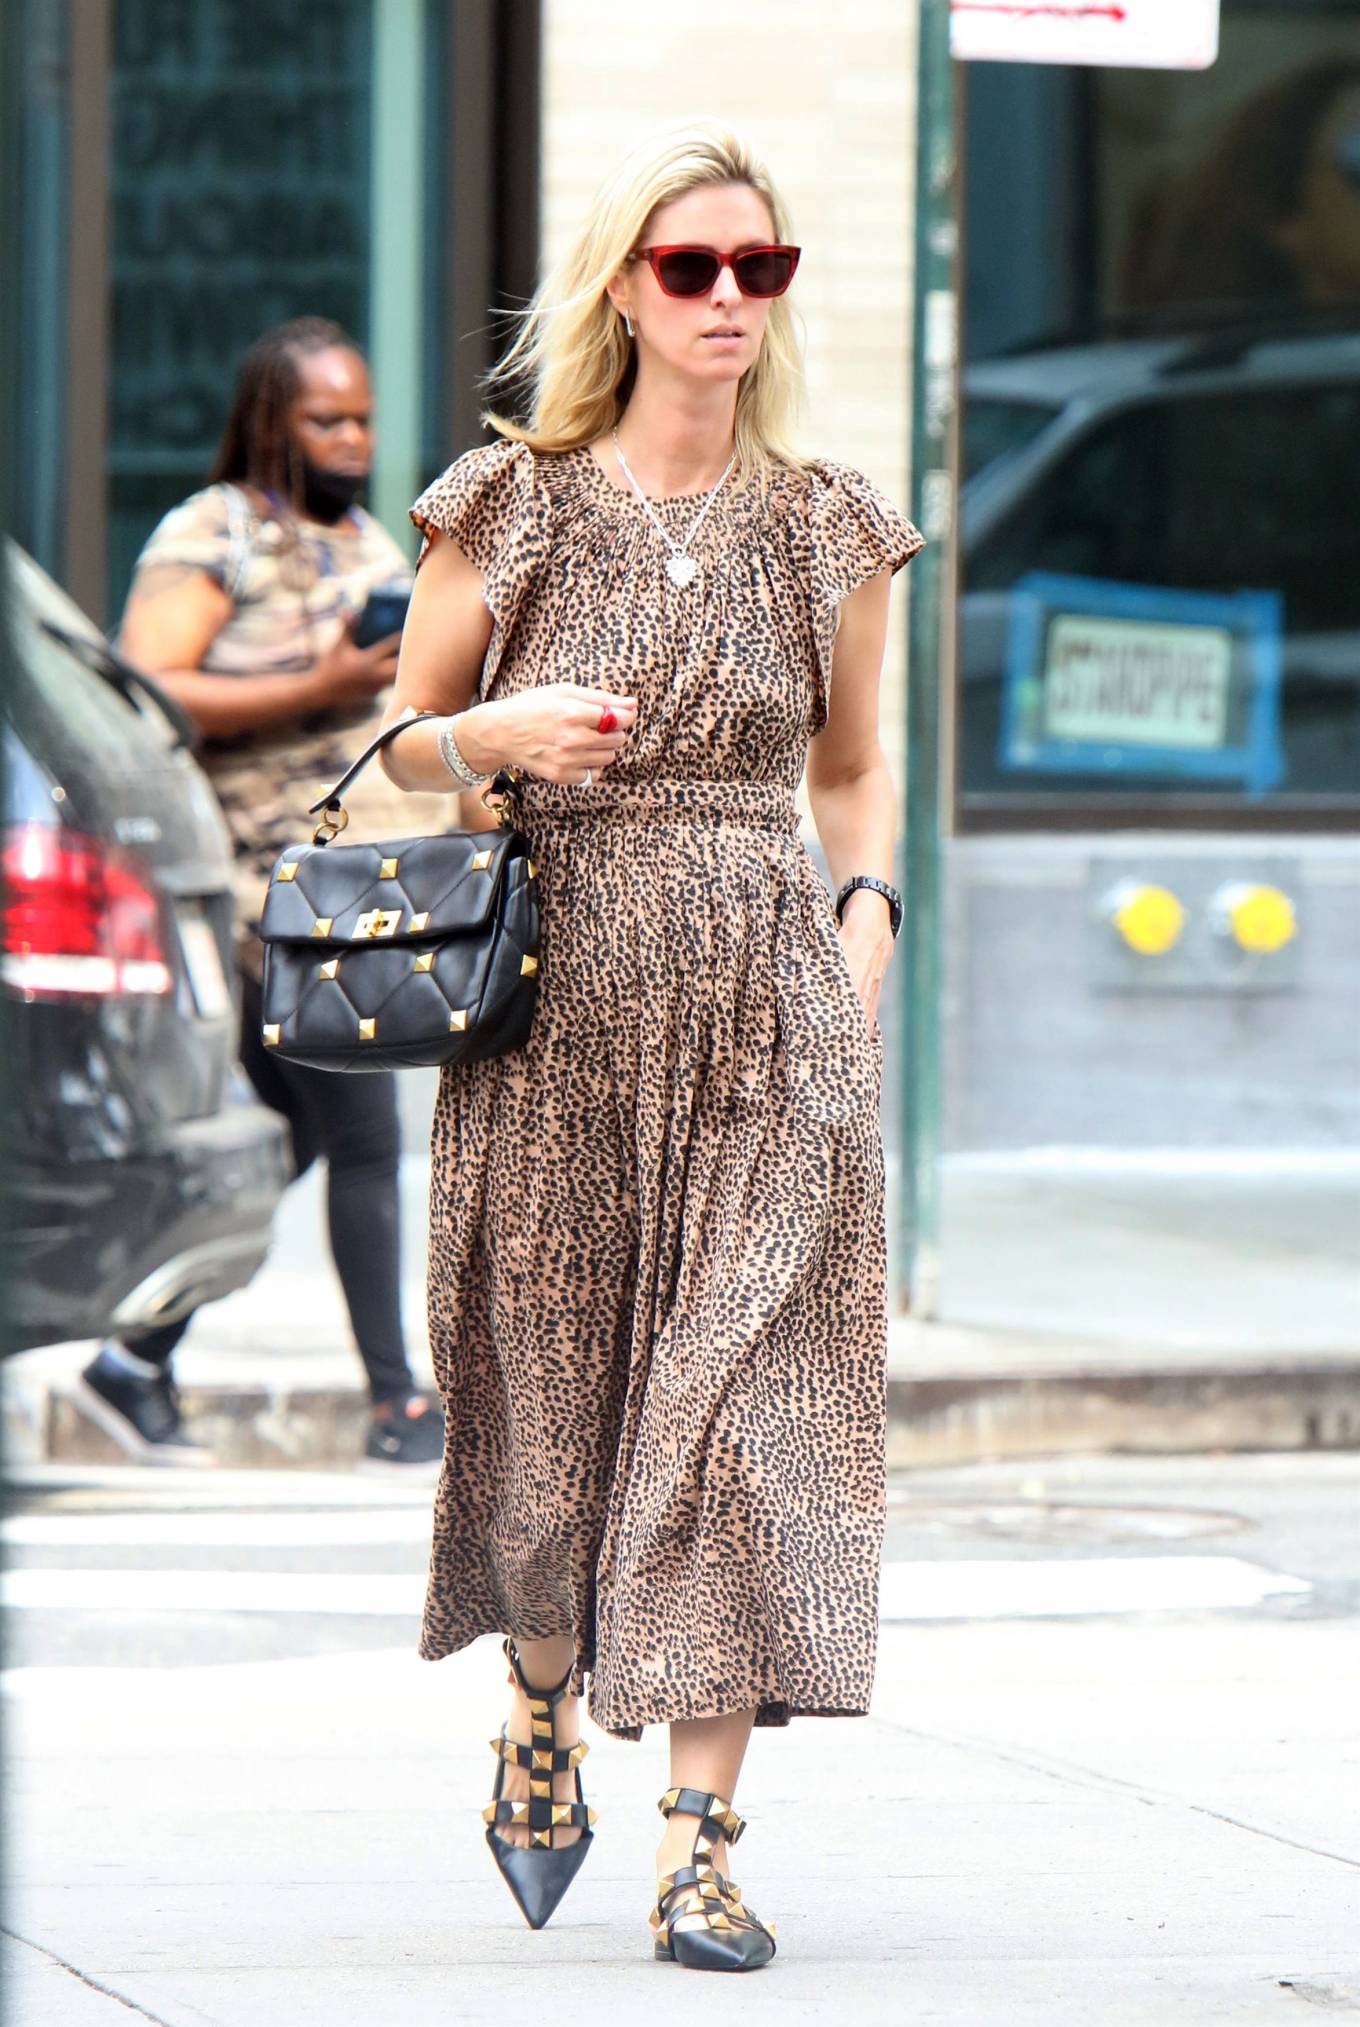 Nicky Hilton 2021 : Nicky Hilton – Rocks leopard print dress while out in Downtown Manhattan-10